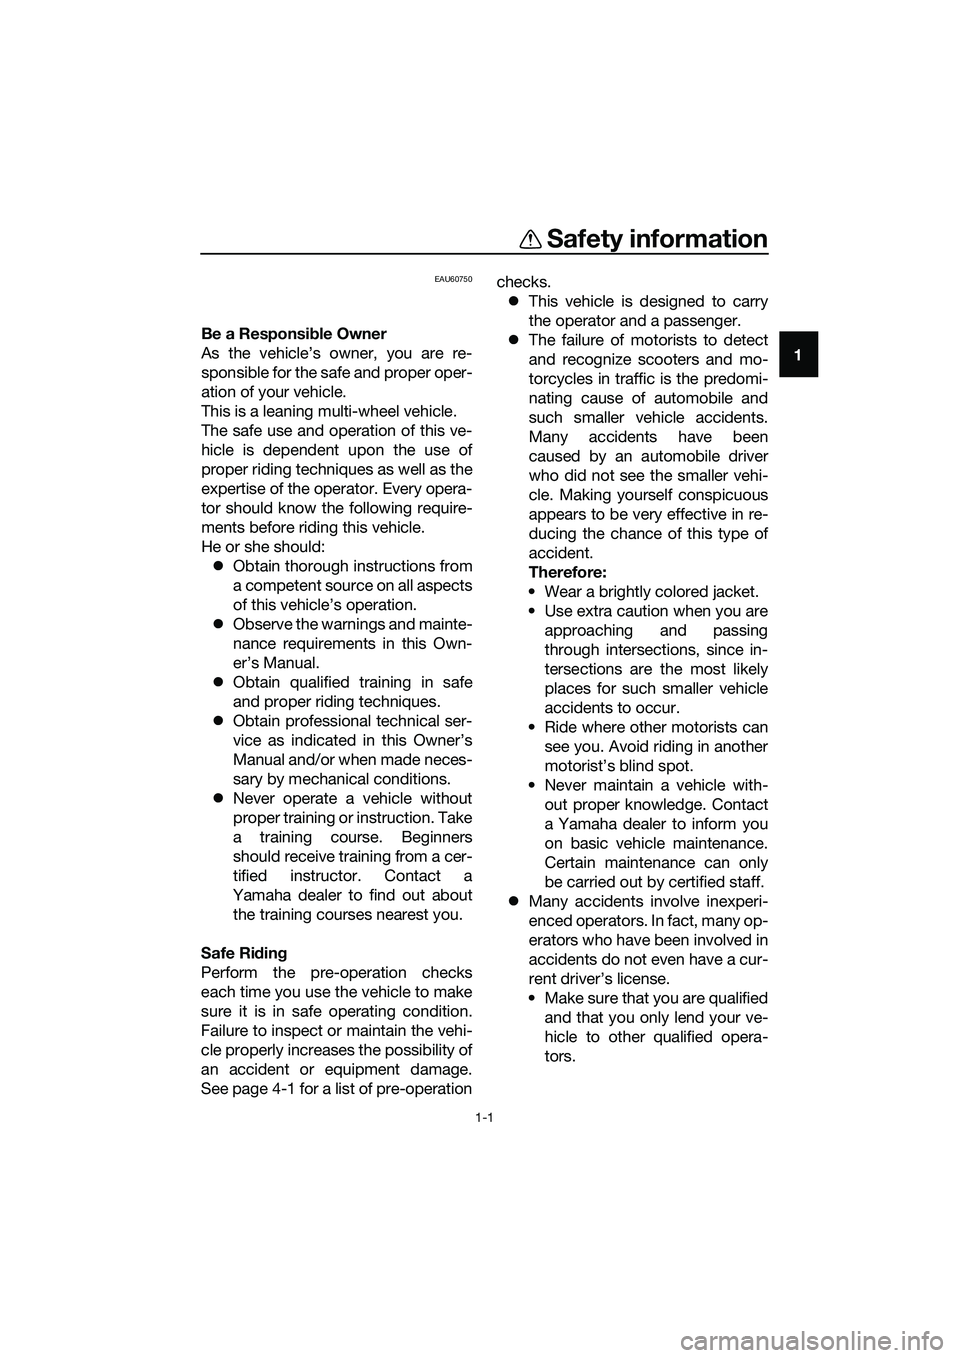 YAMAHA TRICITY 2017  Owners Manual 1-1
1
Safety information
EAU60750
Be a Responsible Owner
As the vehicle’s owner, you are re-
sponsible for the safe and proper oper-
ation of your vehicle.
This is a leaning multi-wheel vehicle.
The